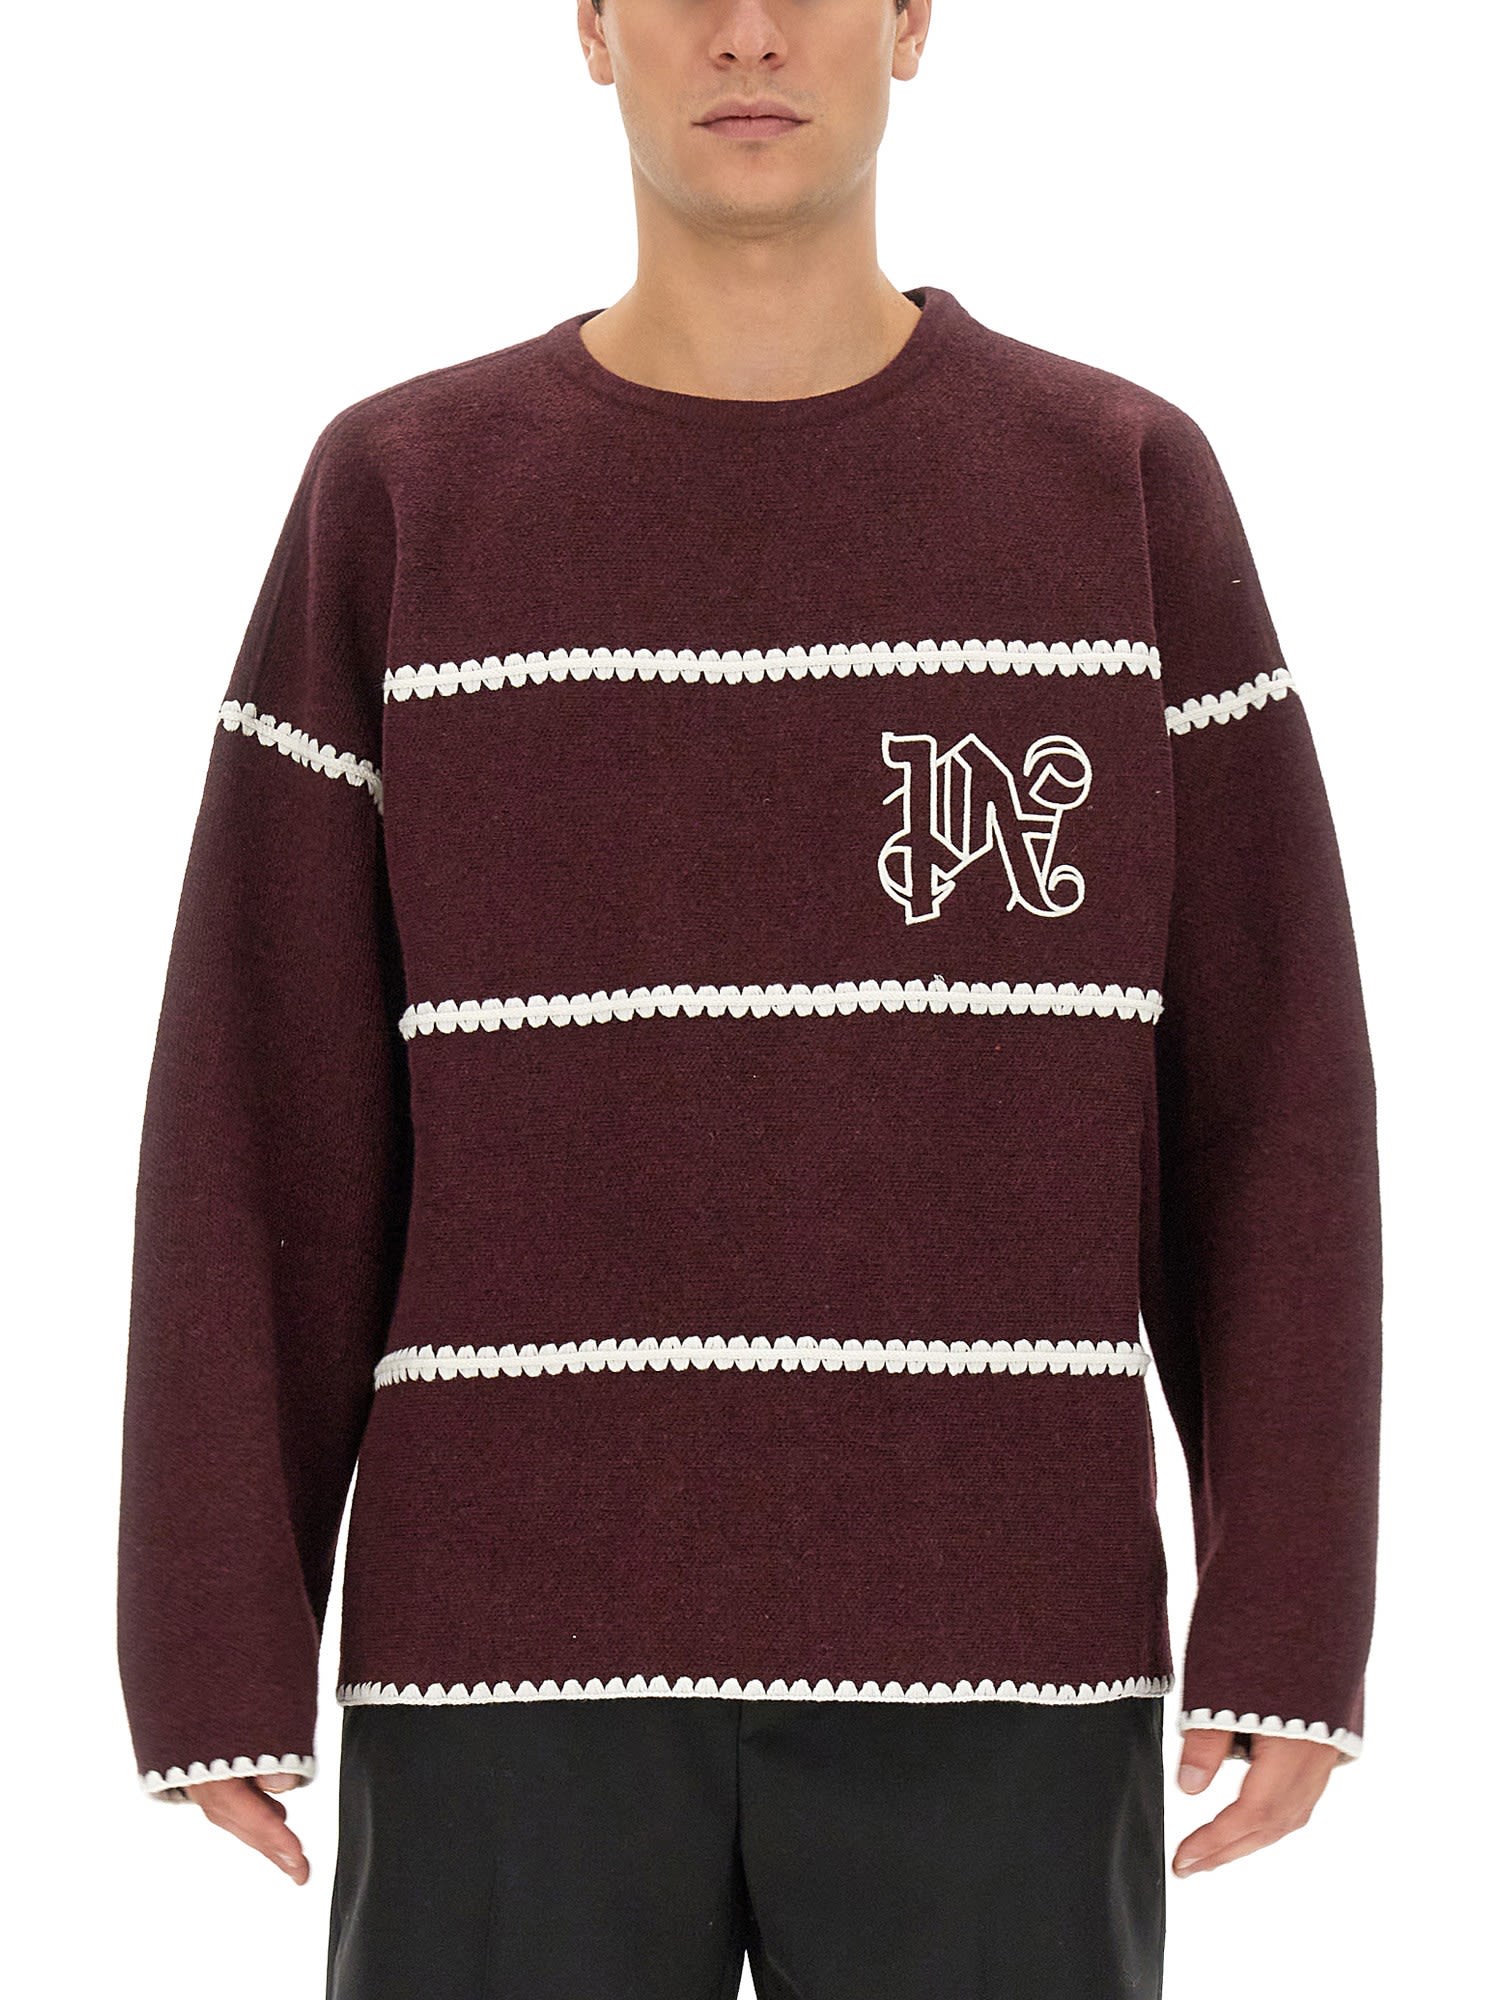 Palm Angels Monogram Striped Sweater - Size S